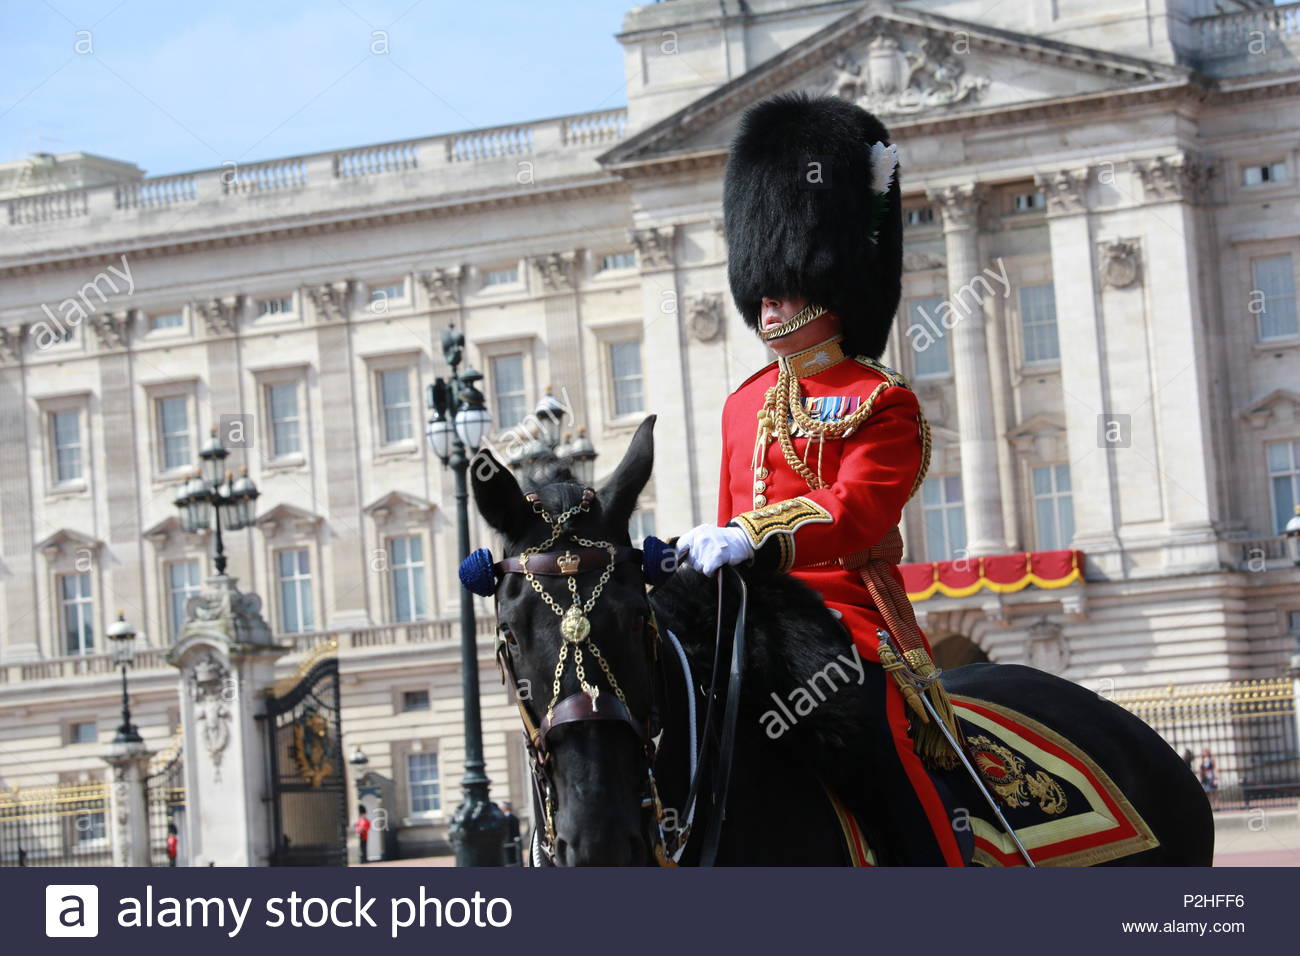 The annual Trooping the Colour has taken place in London in honour of Queen Elizabeth's birthday. Thousands lined the streets to welcome Her Majesty a Stock Photo